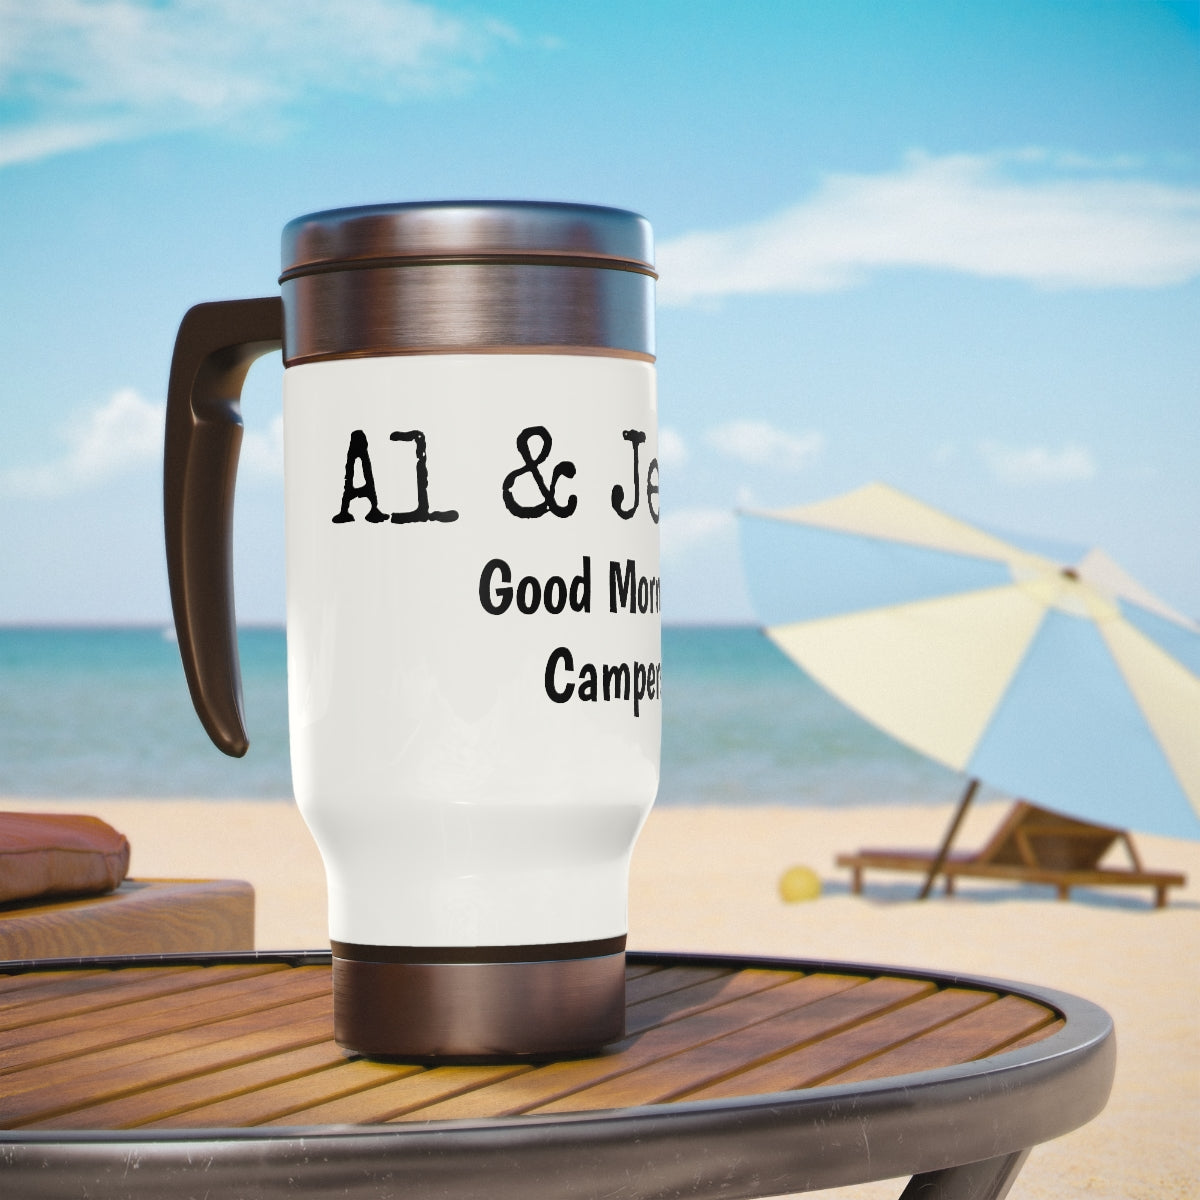 Al & Jerry "Good Morning Campers" Stainless Steel Travel Mug with Handle, 14oz